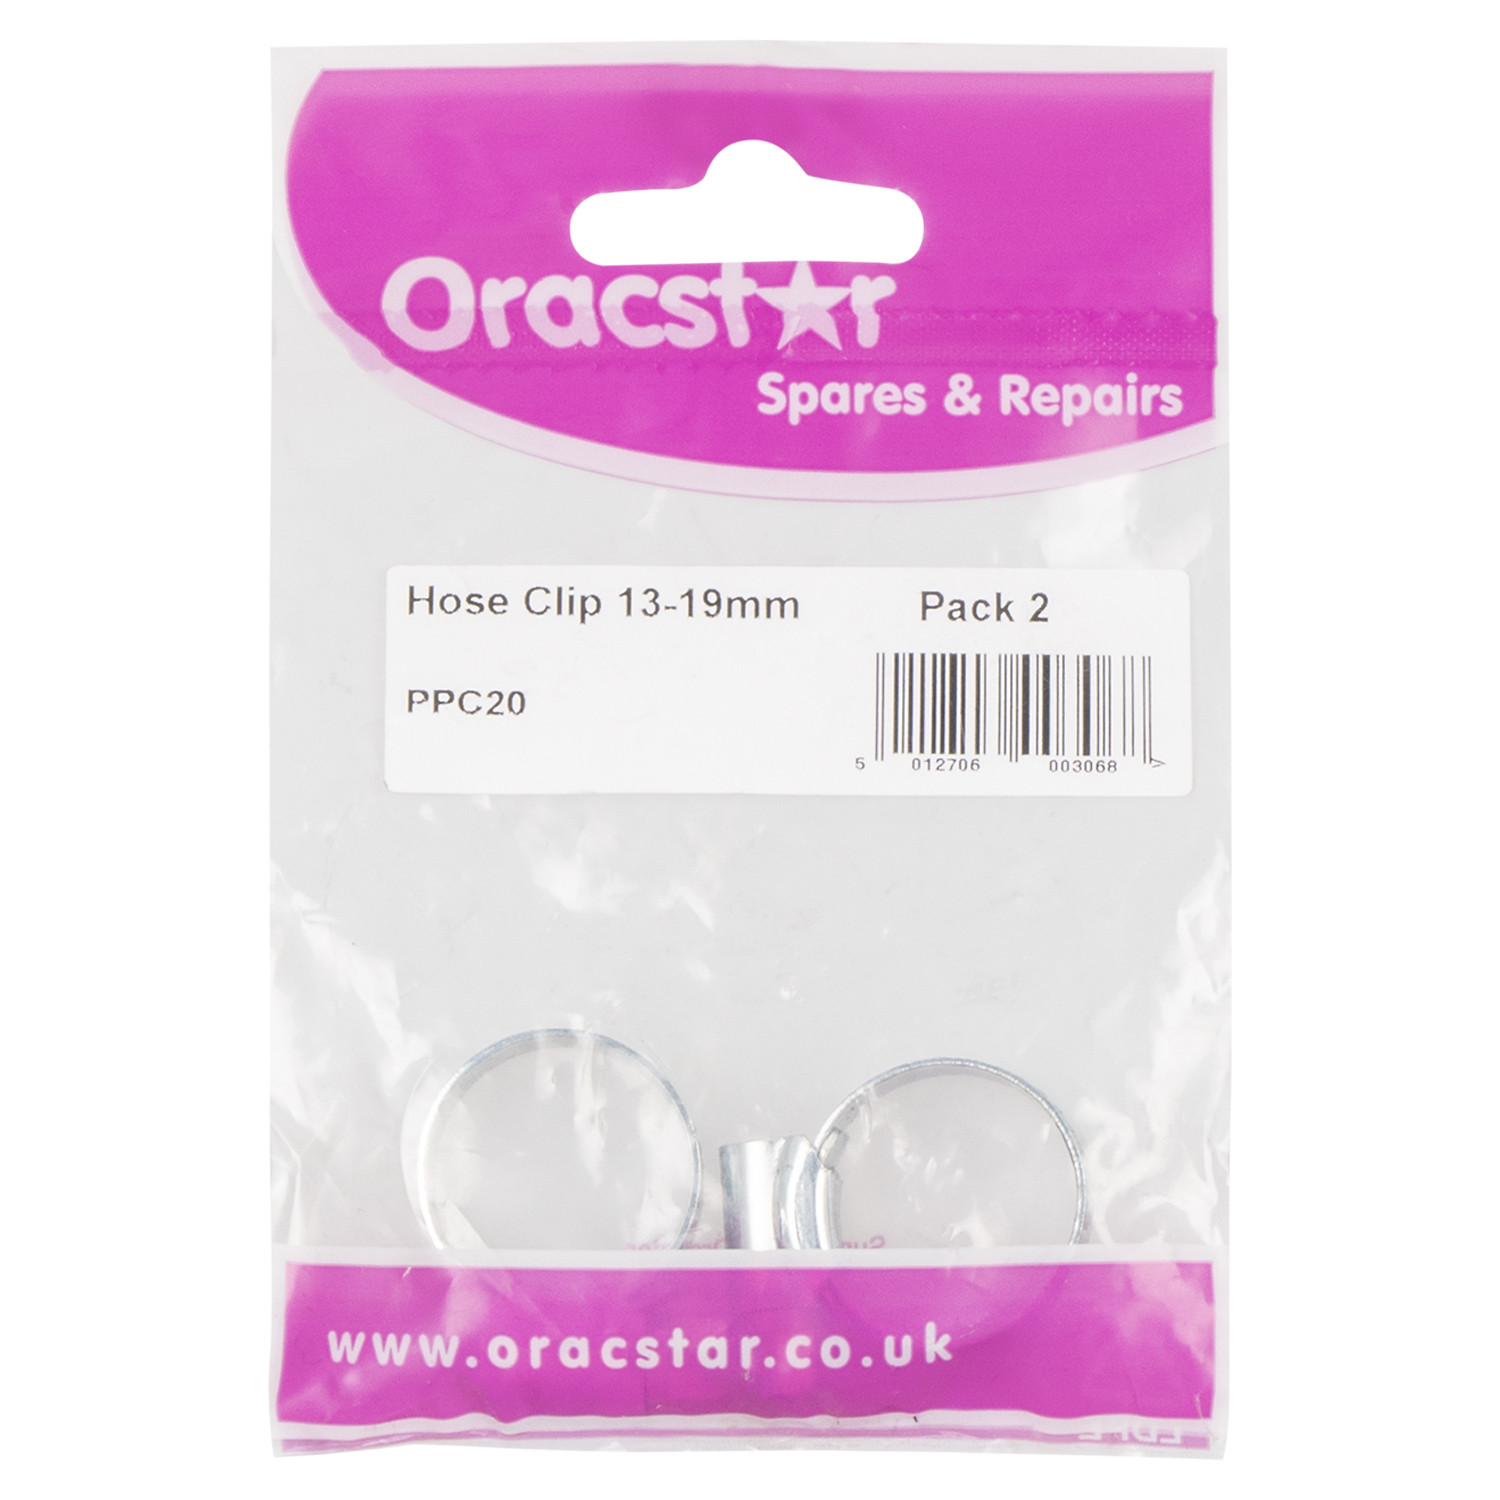 Oracstar 13 to 19mm Hose Clips 2 Pack Image 2